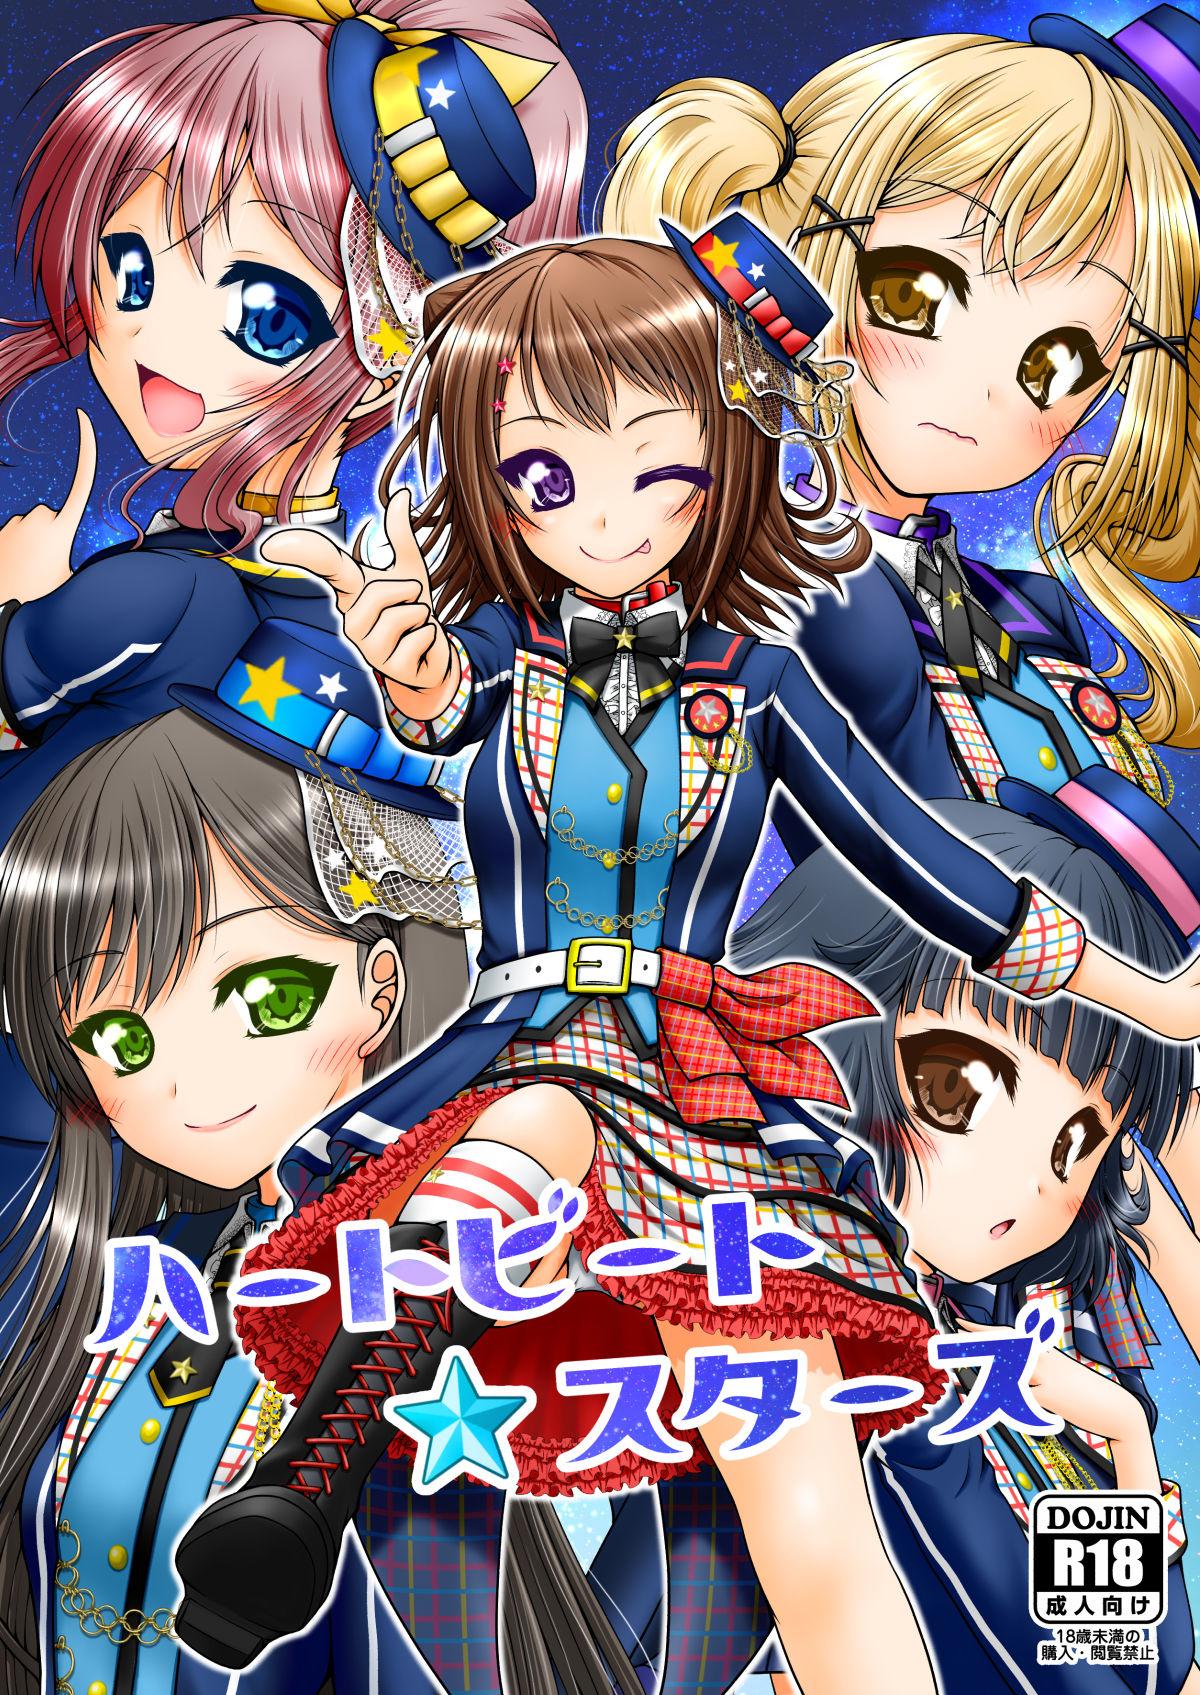 Flagra Heartbeat Stars - Bang dream Infiel - Picture 2